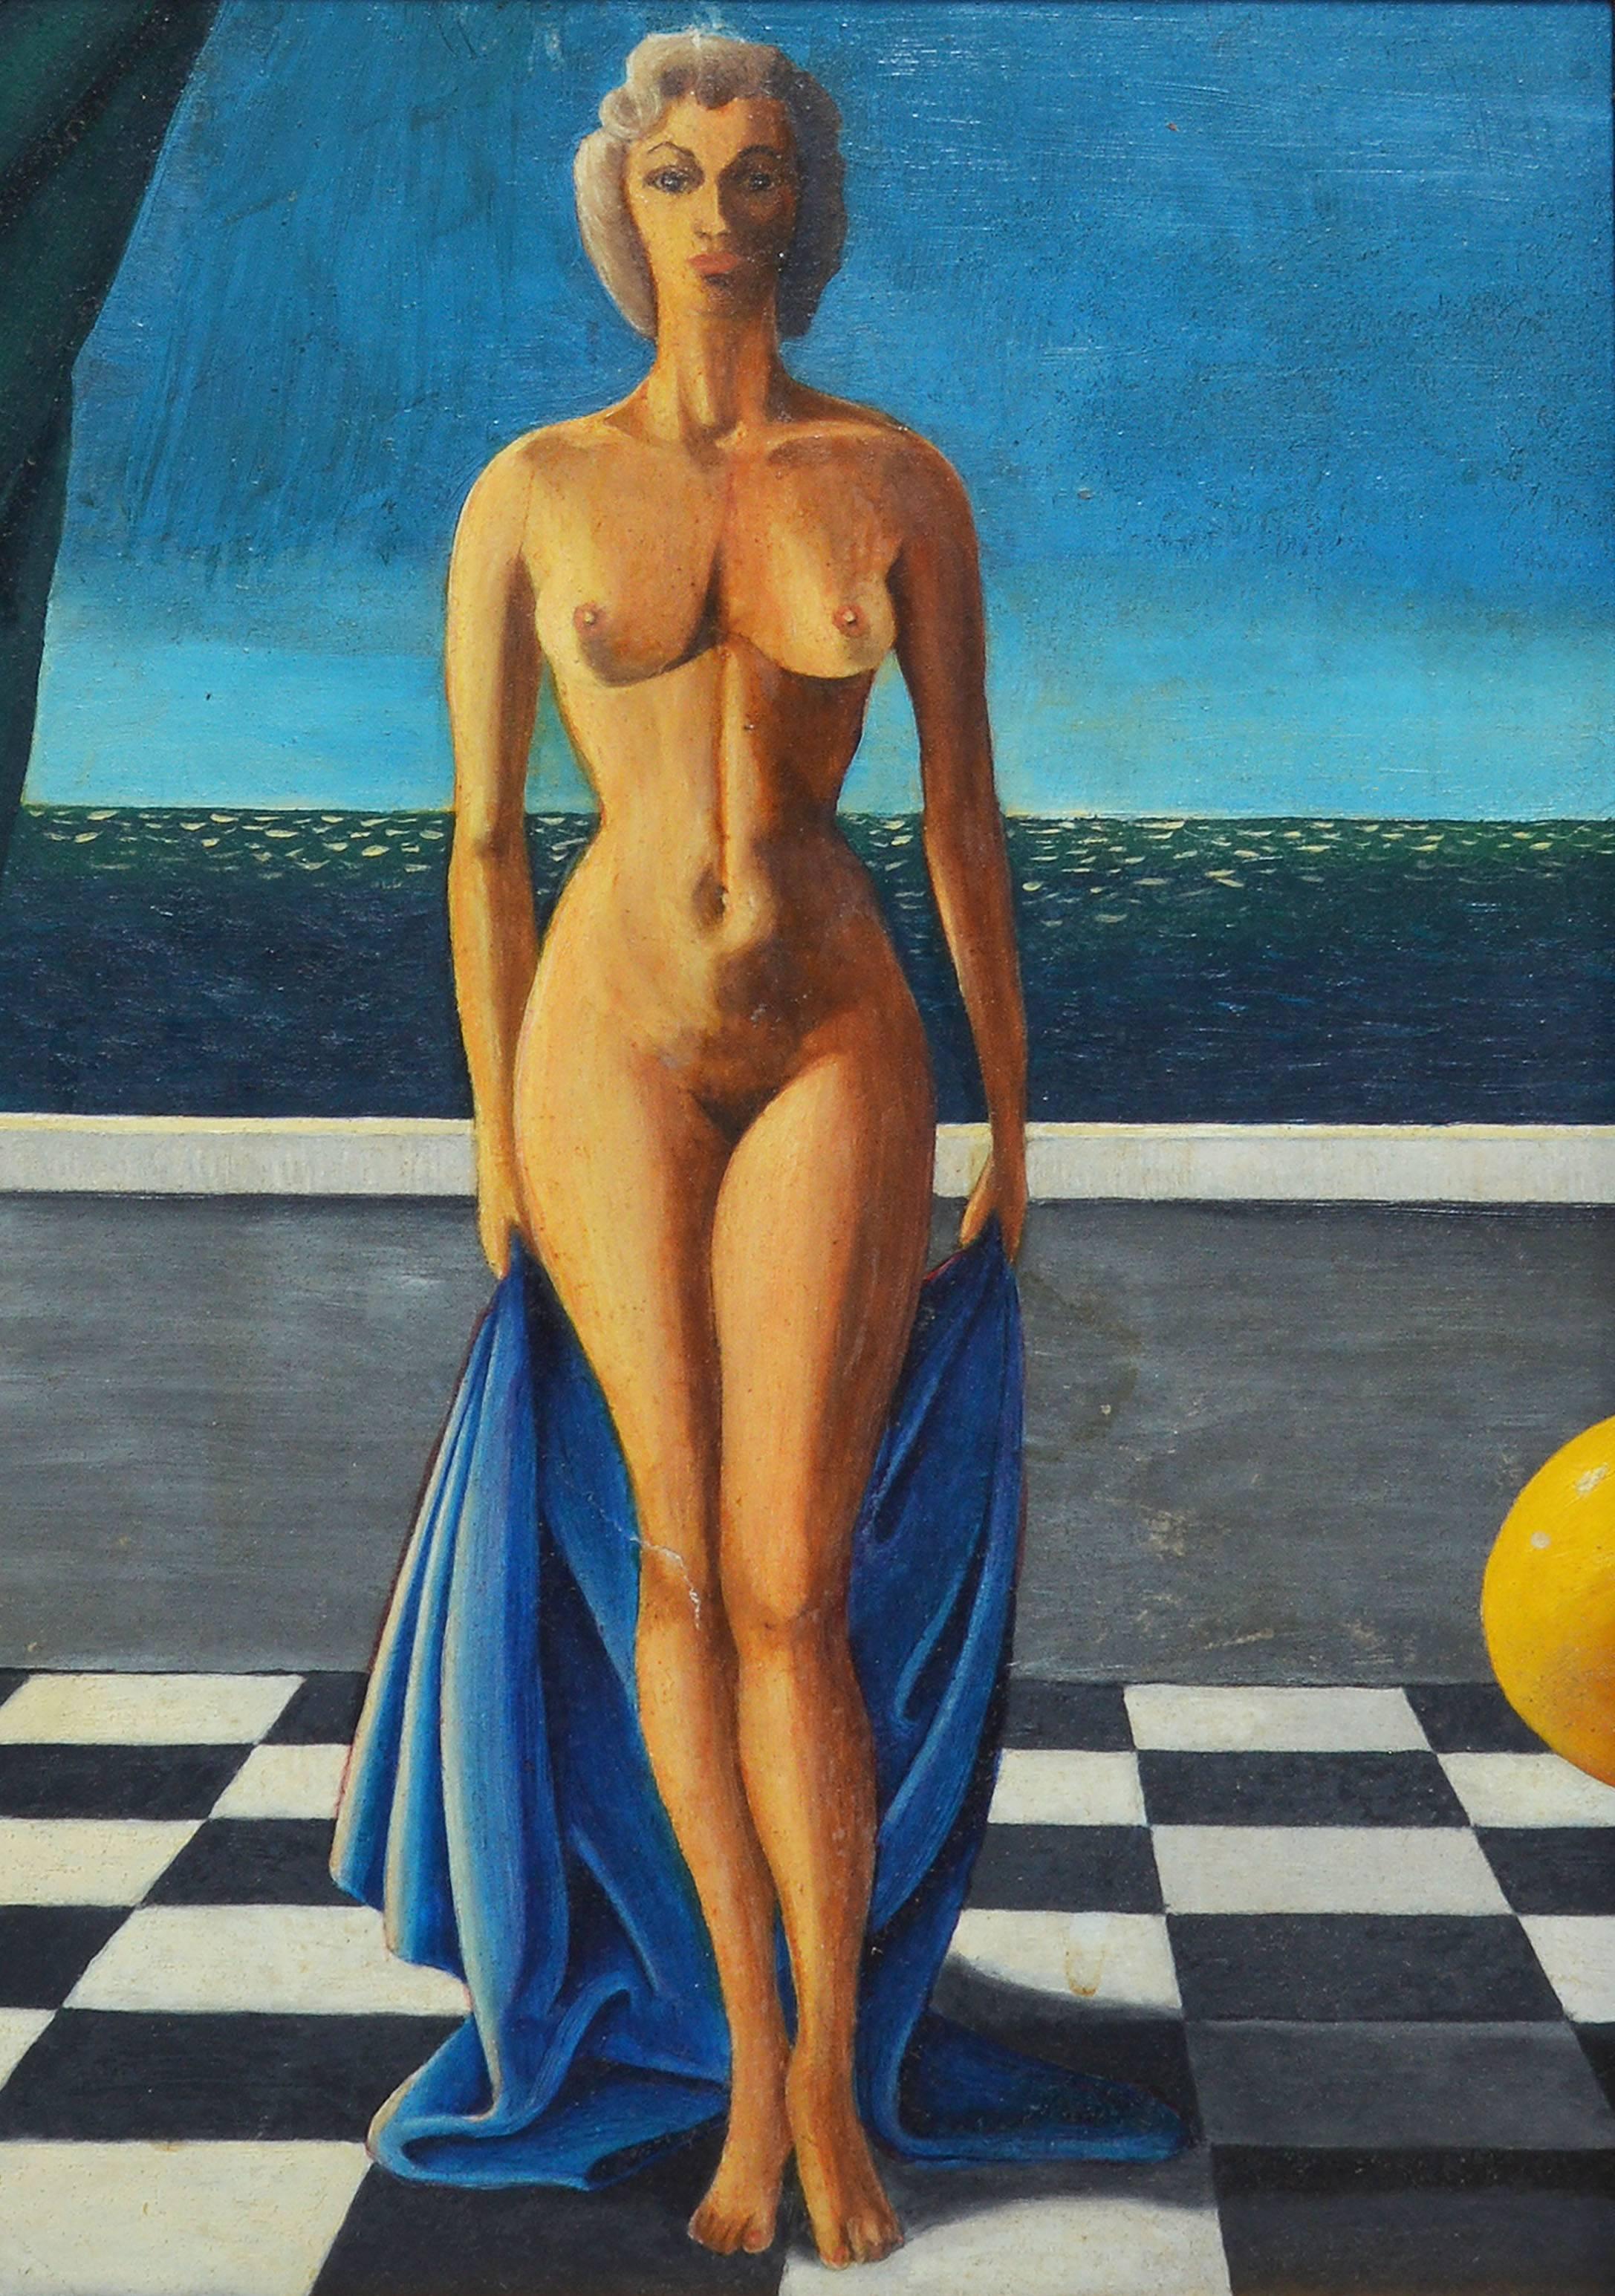 Surreal Nude Portrait by the Sea - Beige Nude Painting by Unknown